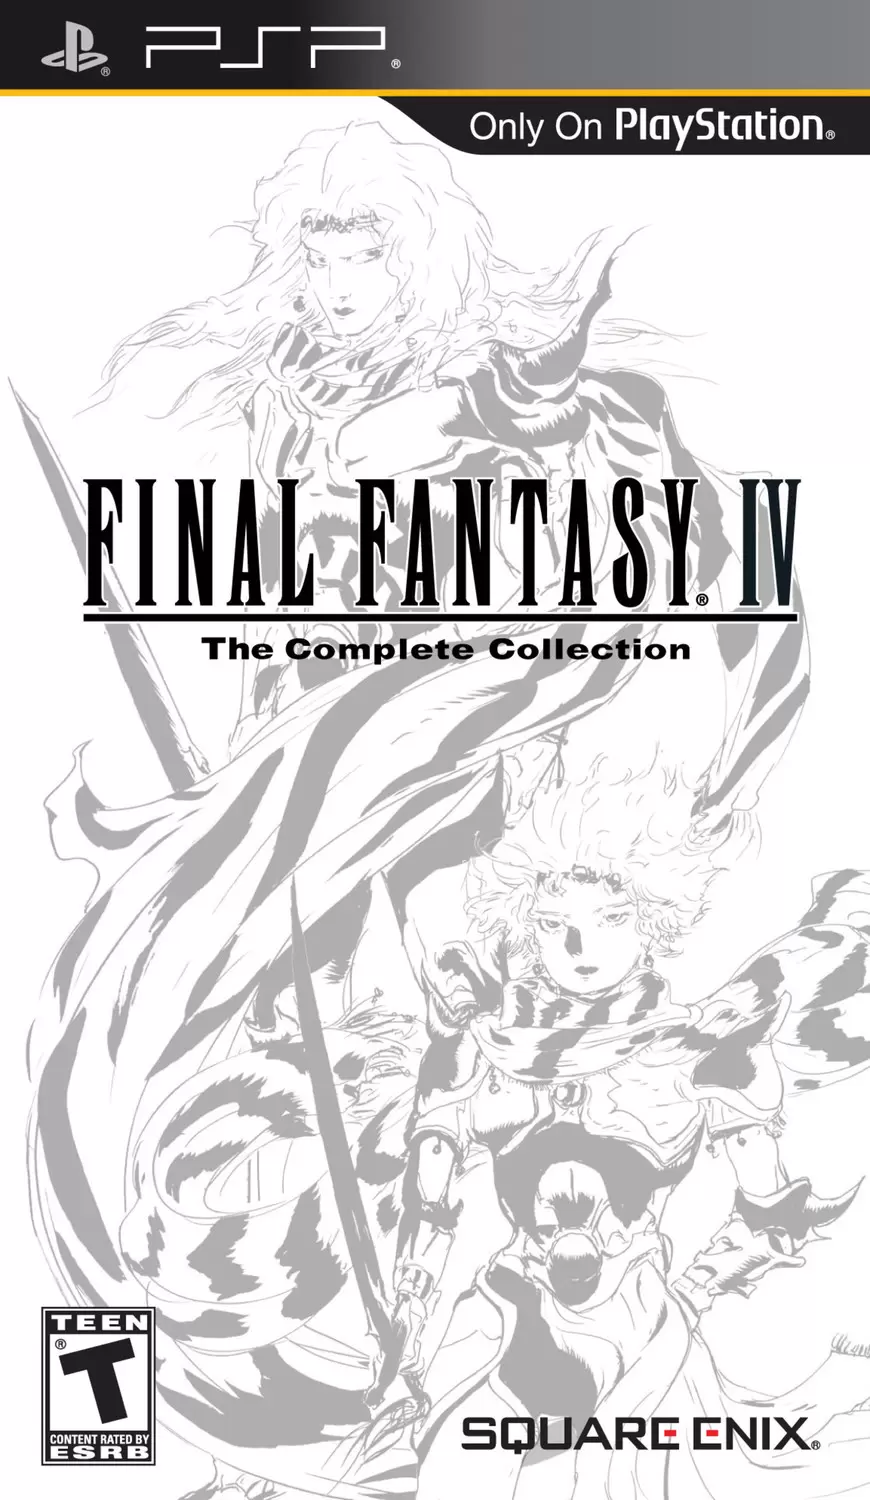 PSP Games - Final Fantasy IV: The Complete Collection